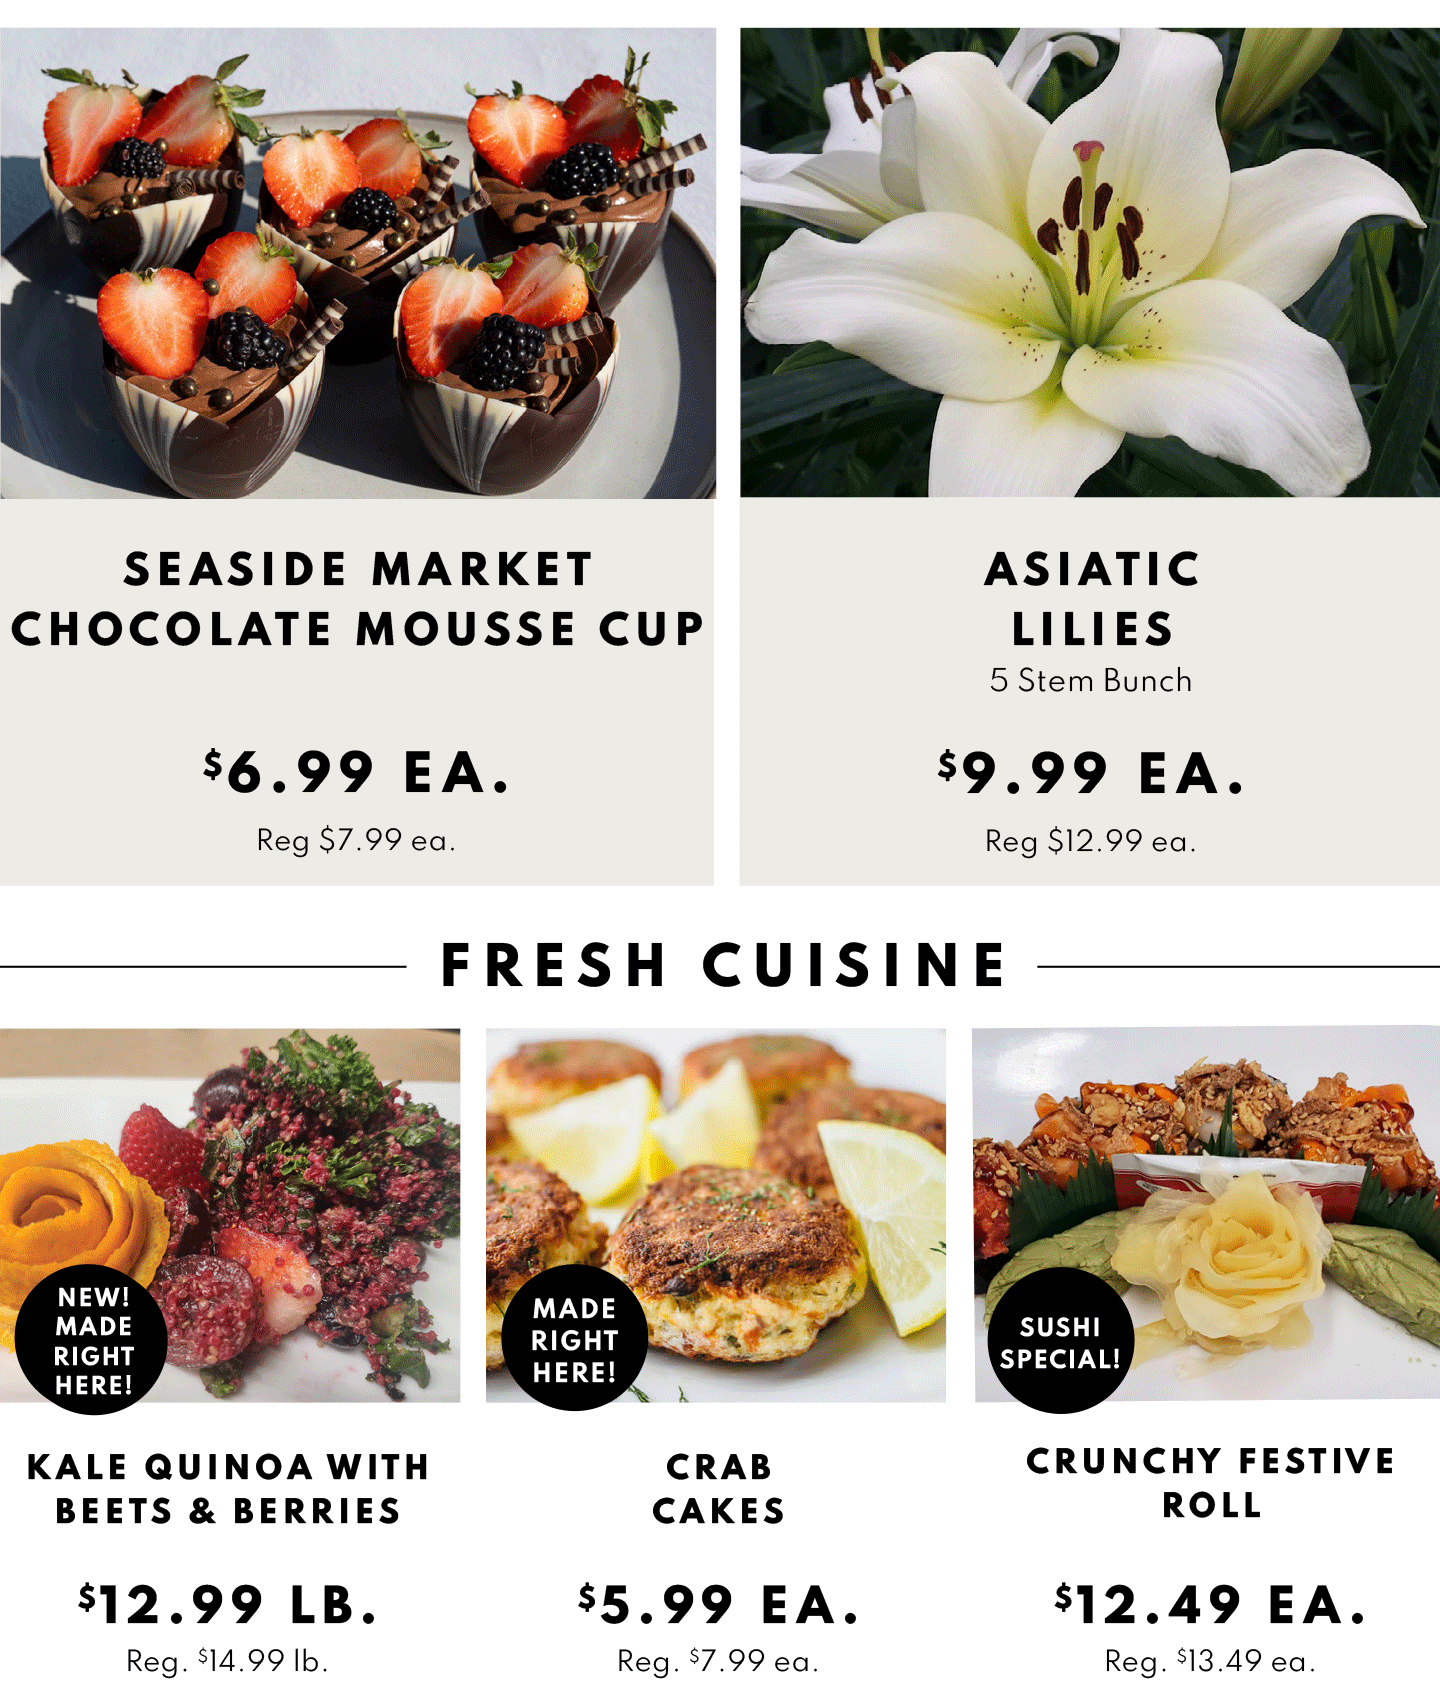 Seaside Market Chocolate Mousse Cup $6.99 ea and Asiatic Lilies 5 stem bunch $9.99 ea